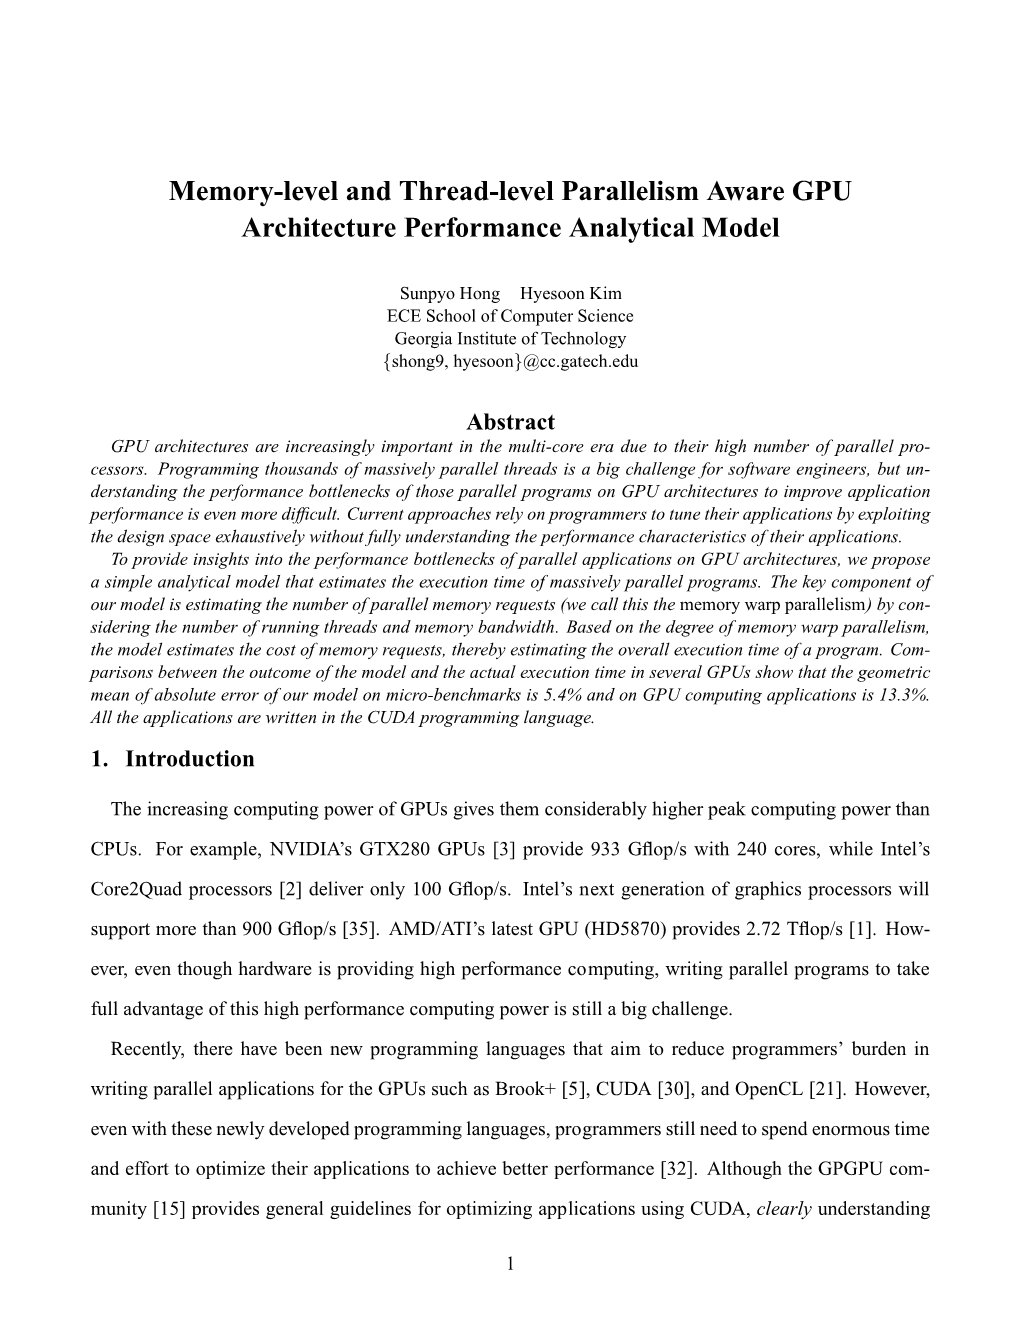 Memory-Level and Thread-Level Parallelism Aware GPU Architecture Performance Analytical Model